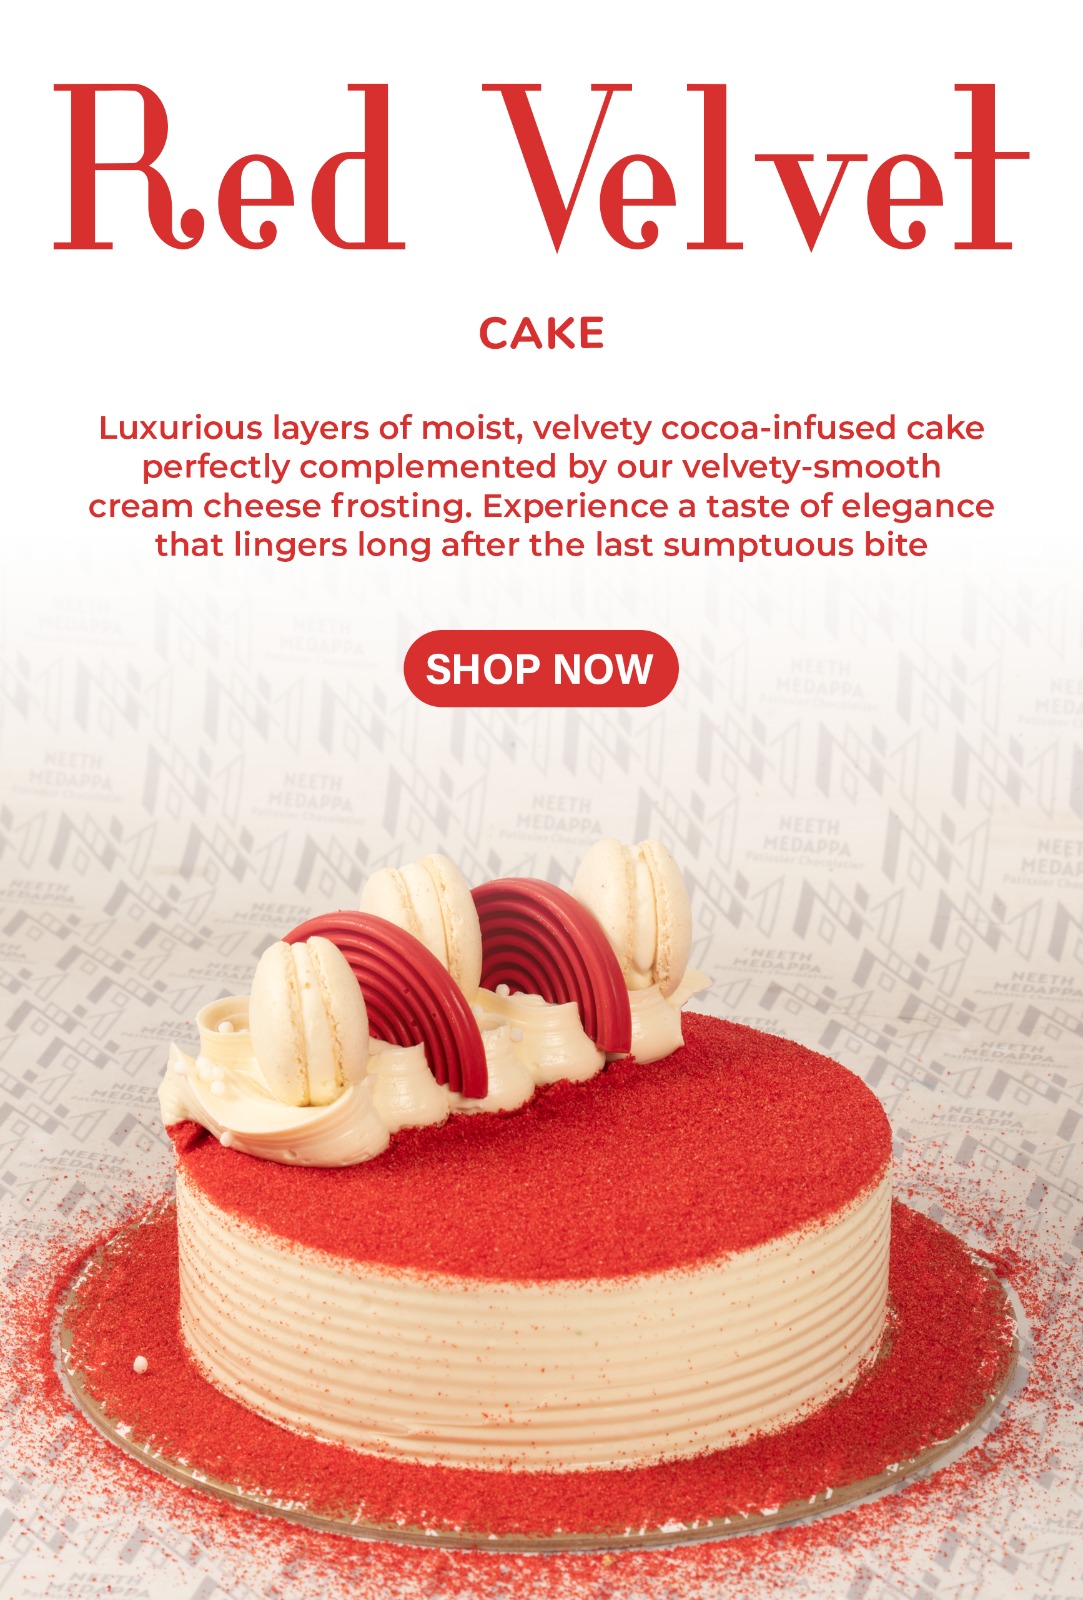 Occasion Cakes — Cakes By Fudge